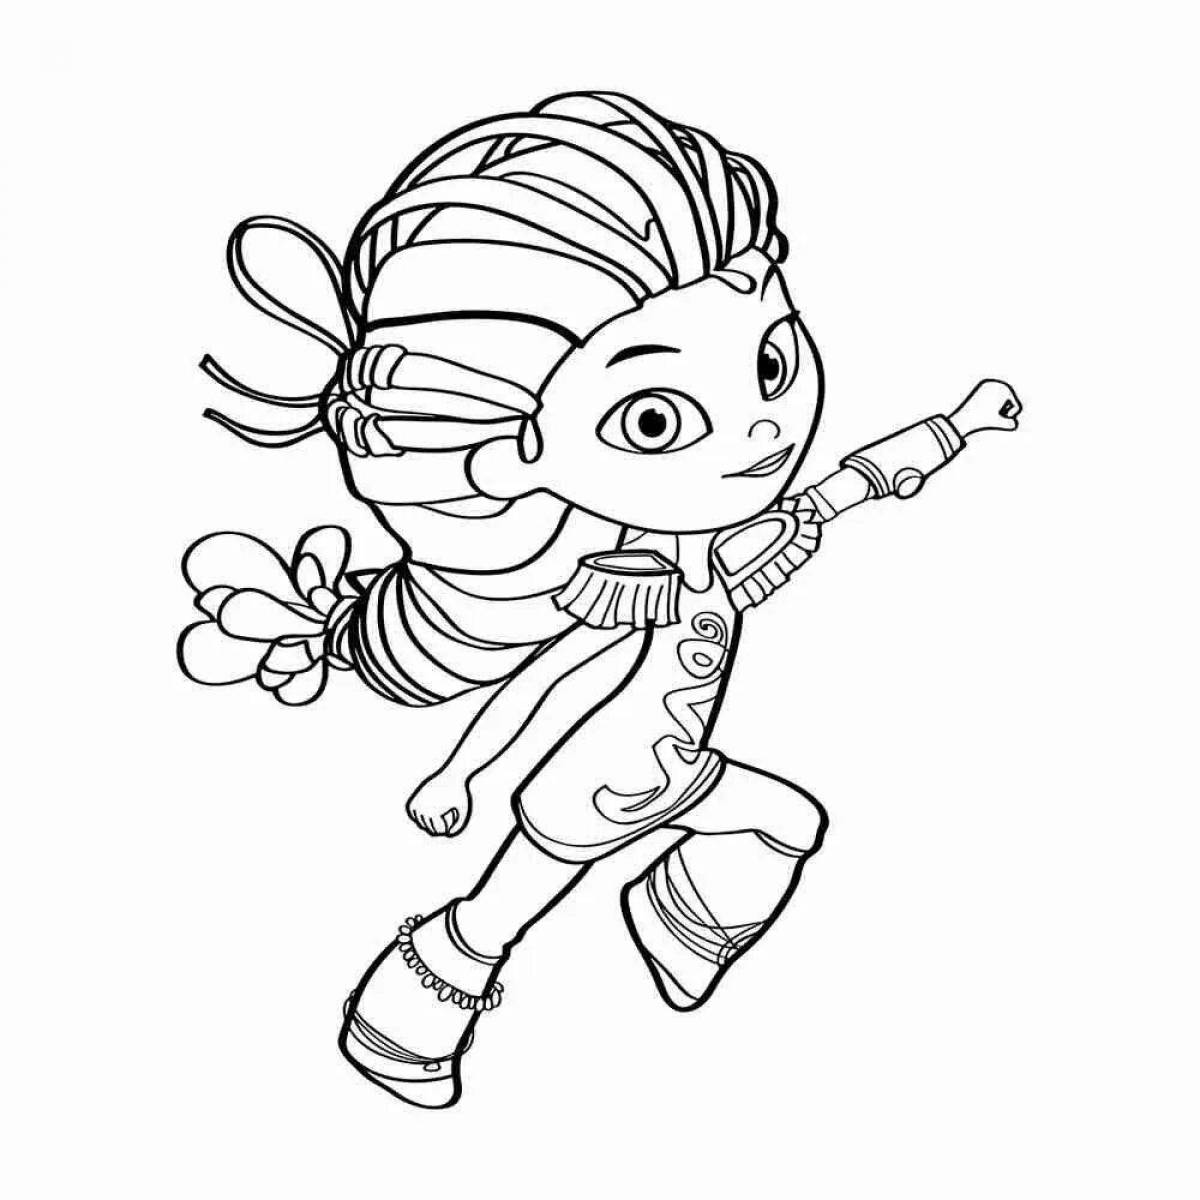 Coloring page adorable patrol for children 6-7 years old